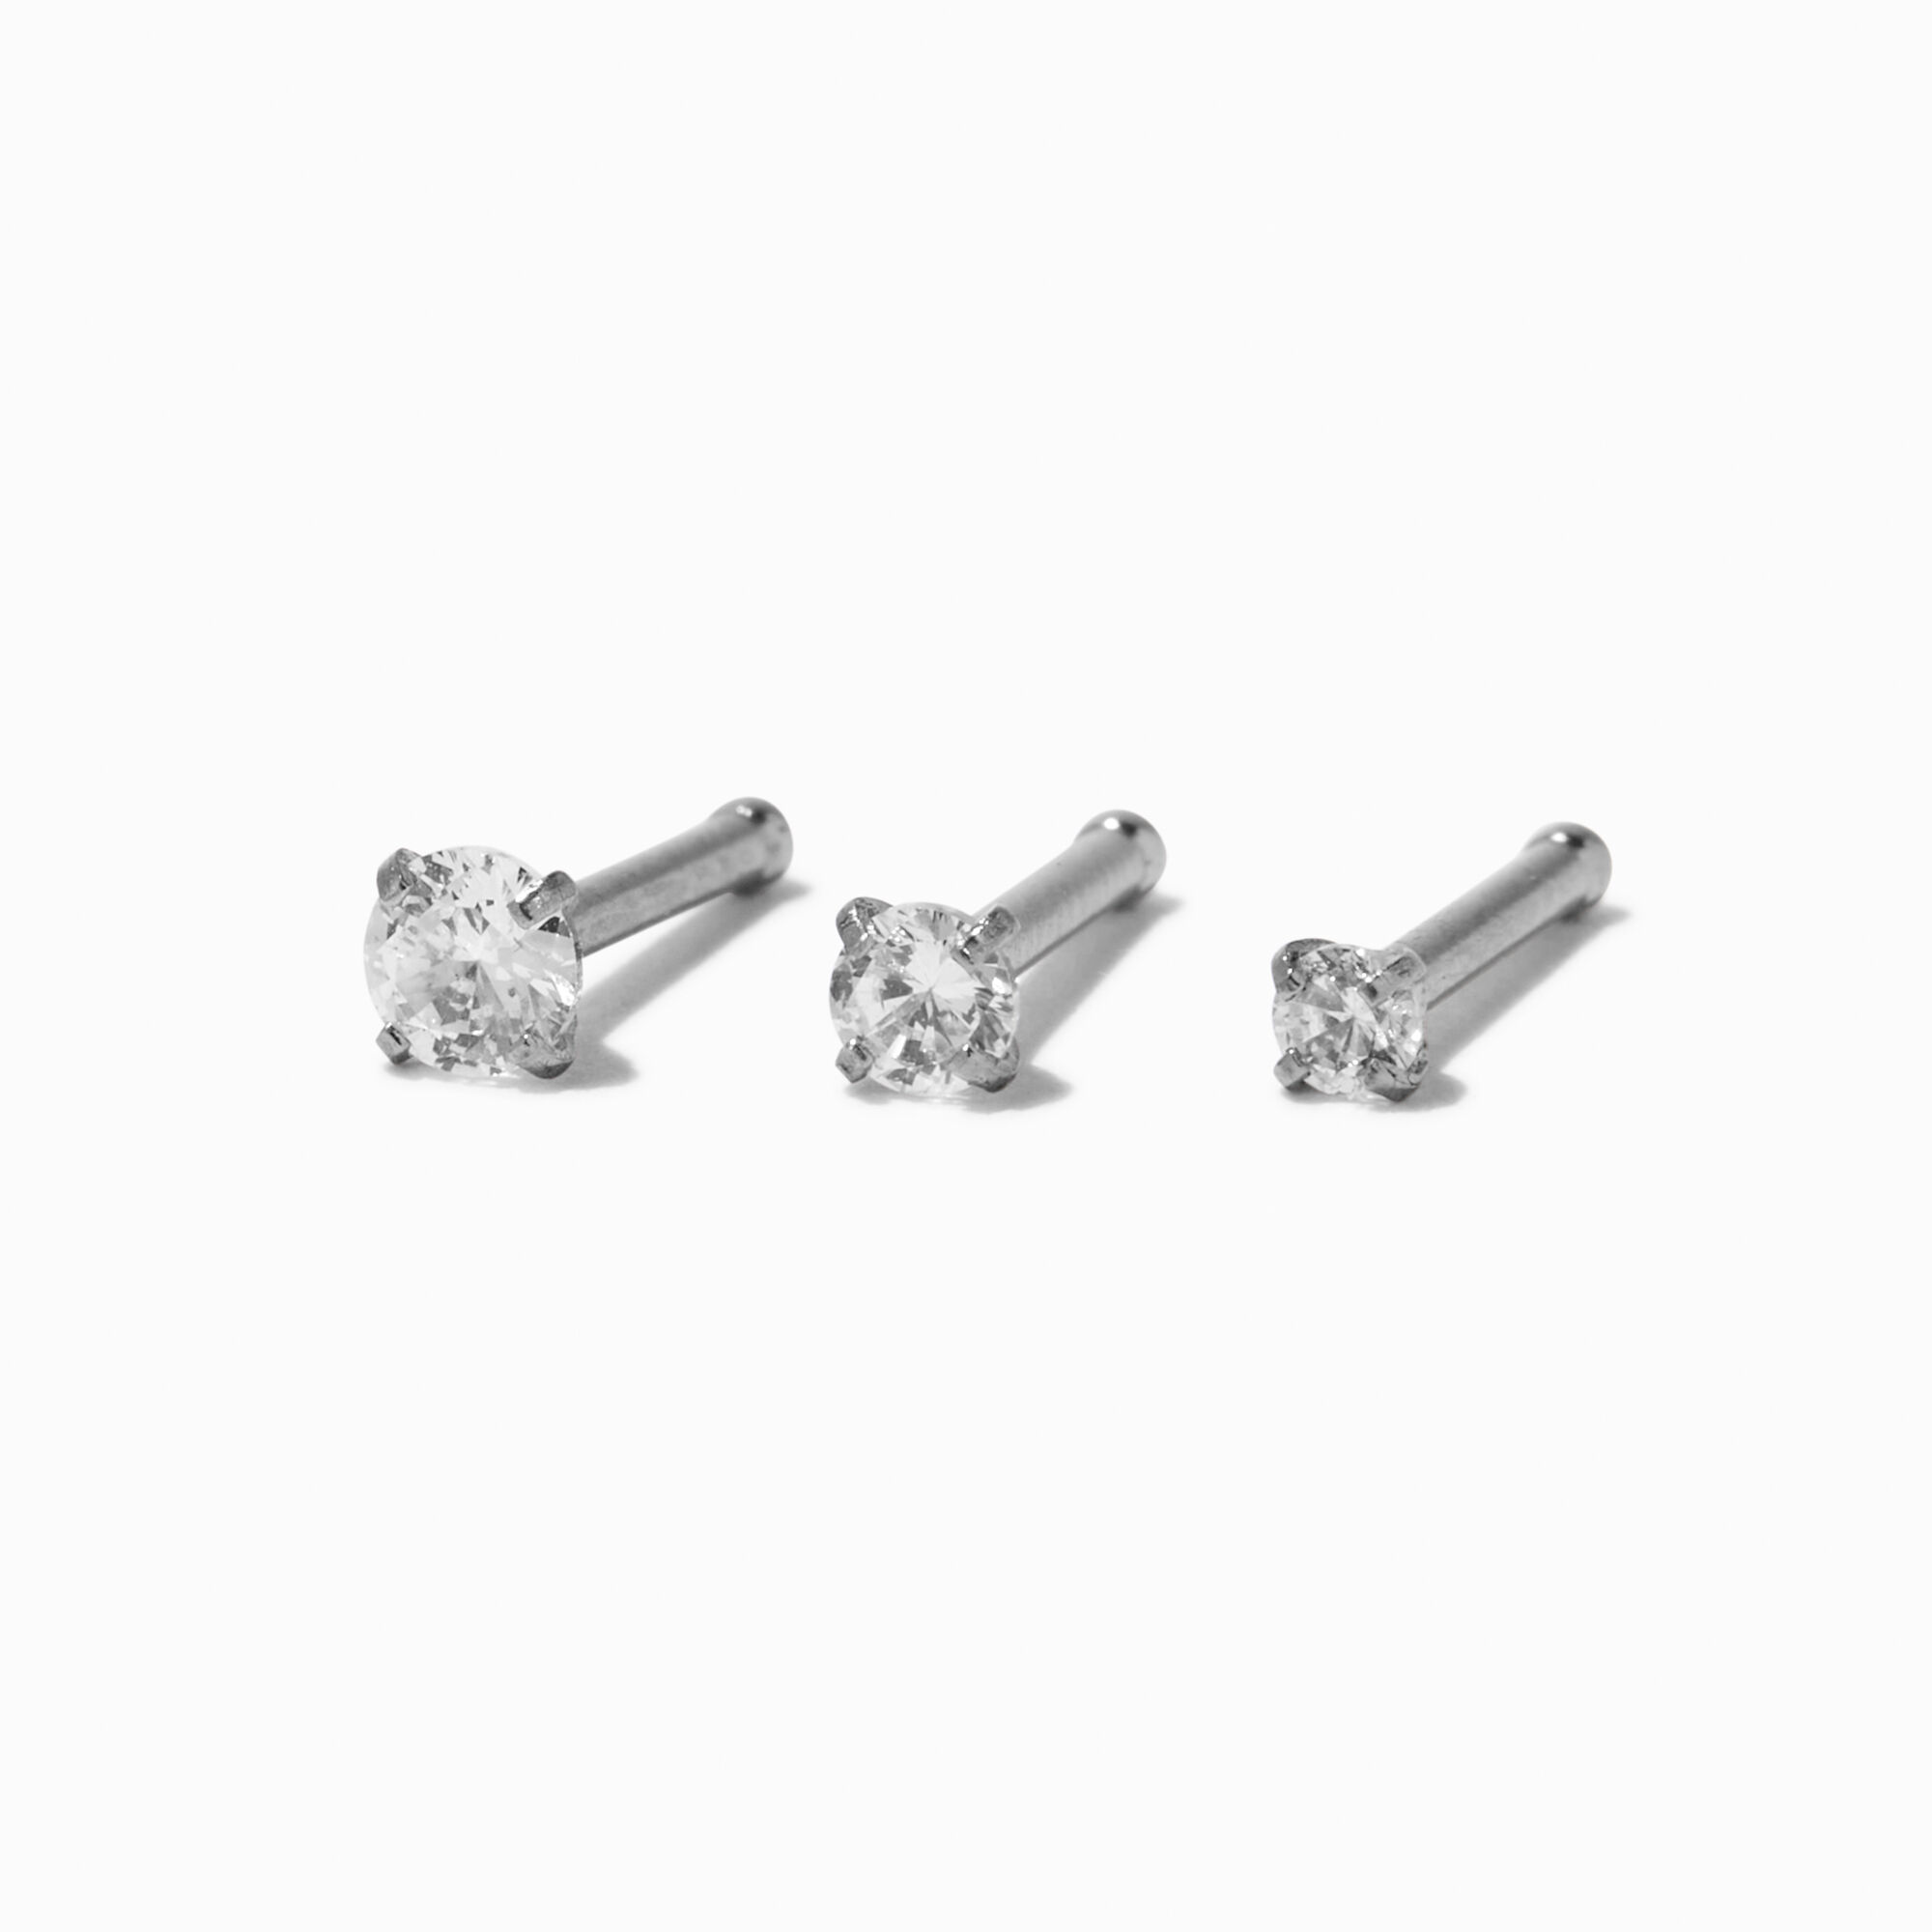 View Claires Tone Graduated Cubic Zirconia 18G Nose Rings 3 Pack Silver information